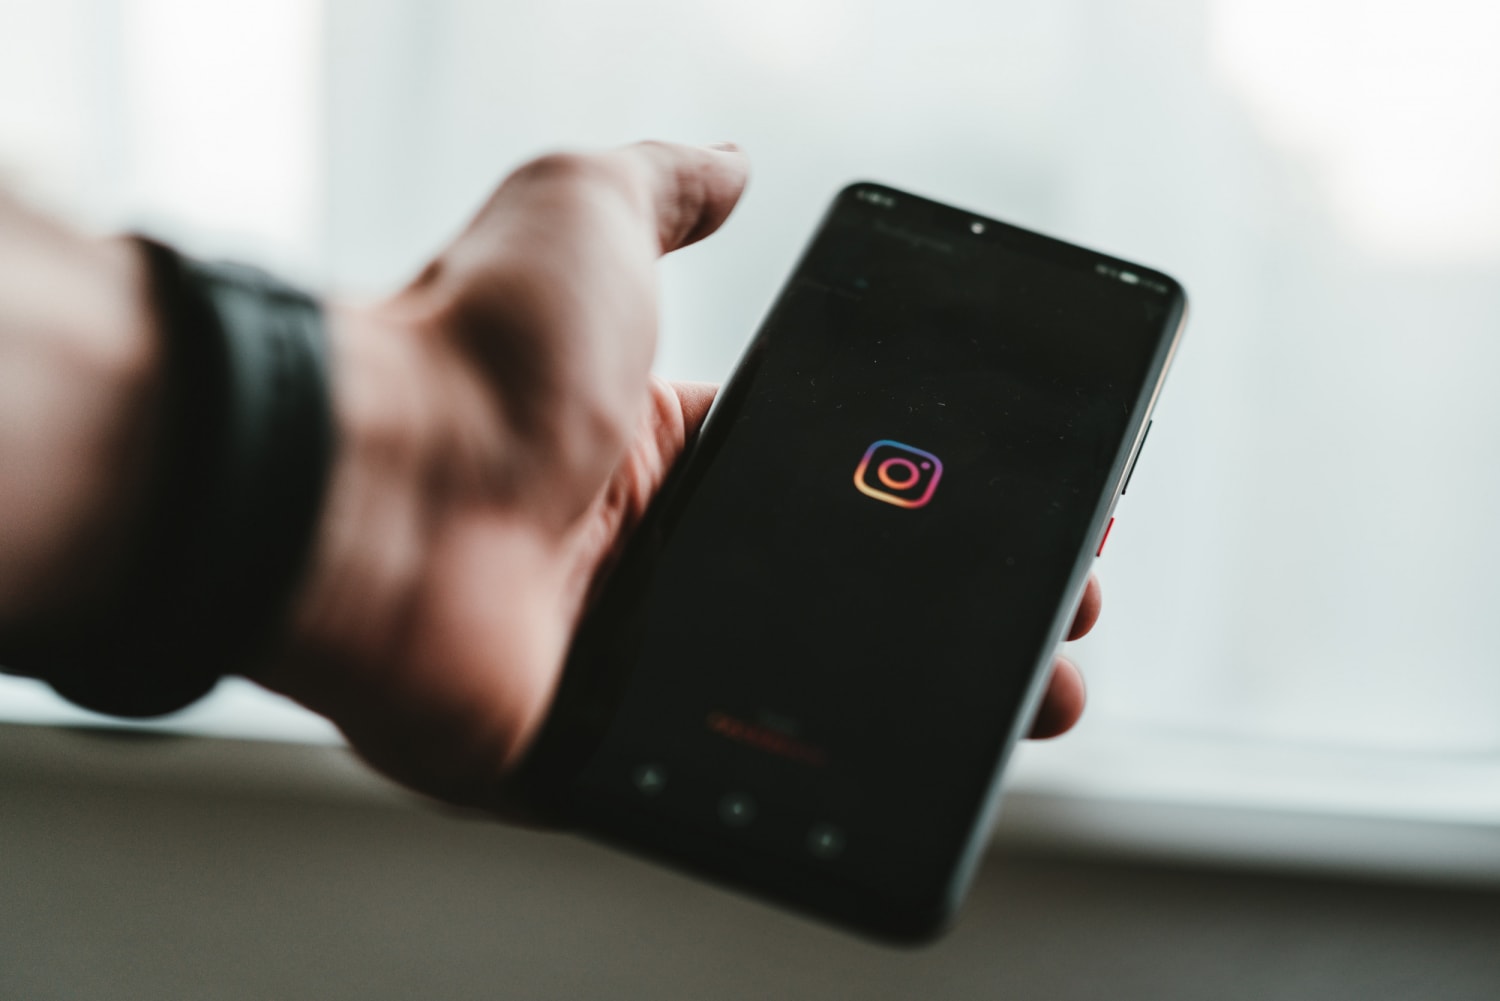 10 Best Sites to Buy Instagram Followers and Likes